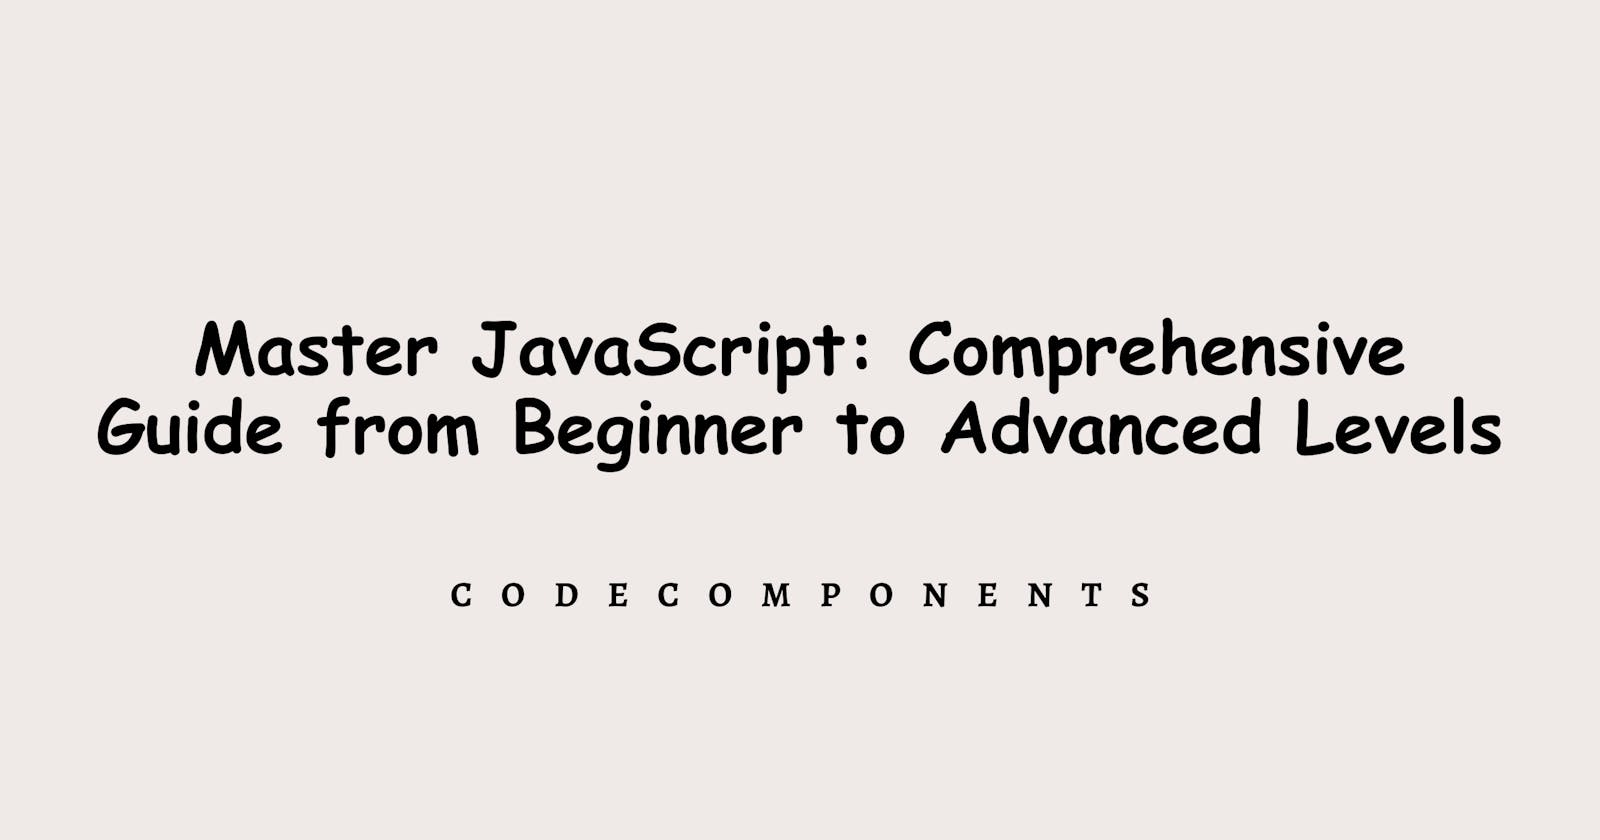 Master JavaScript: A Comprehensive Guide from Beginner to Advanced Levels